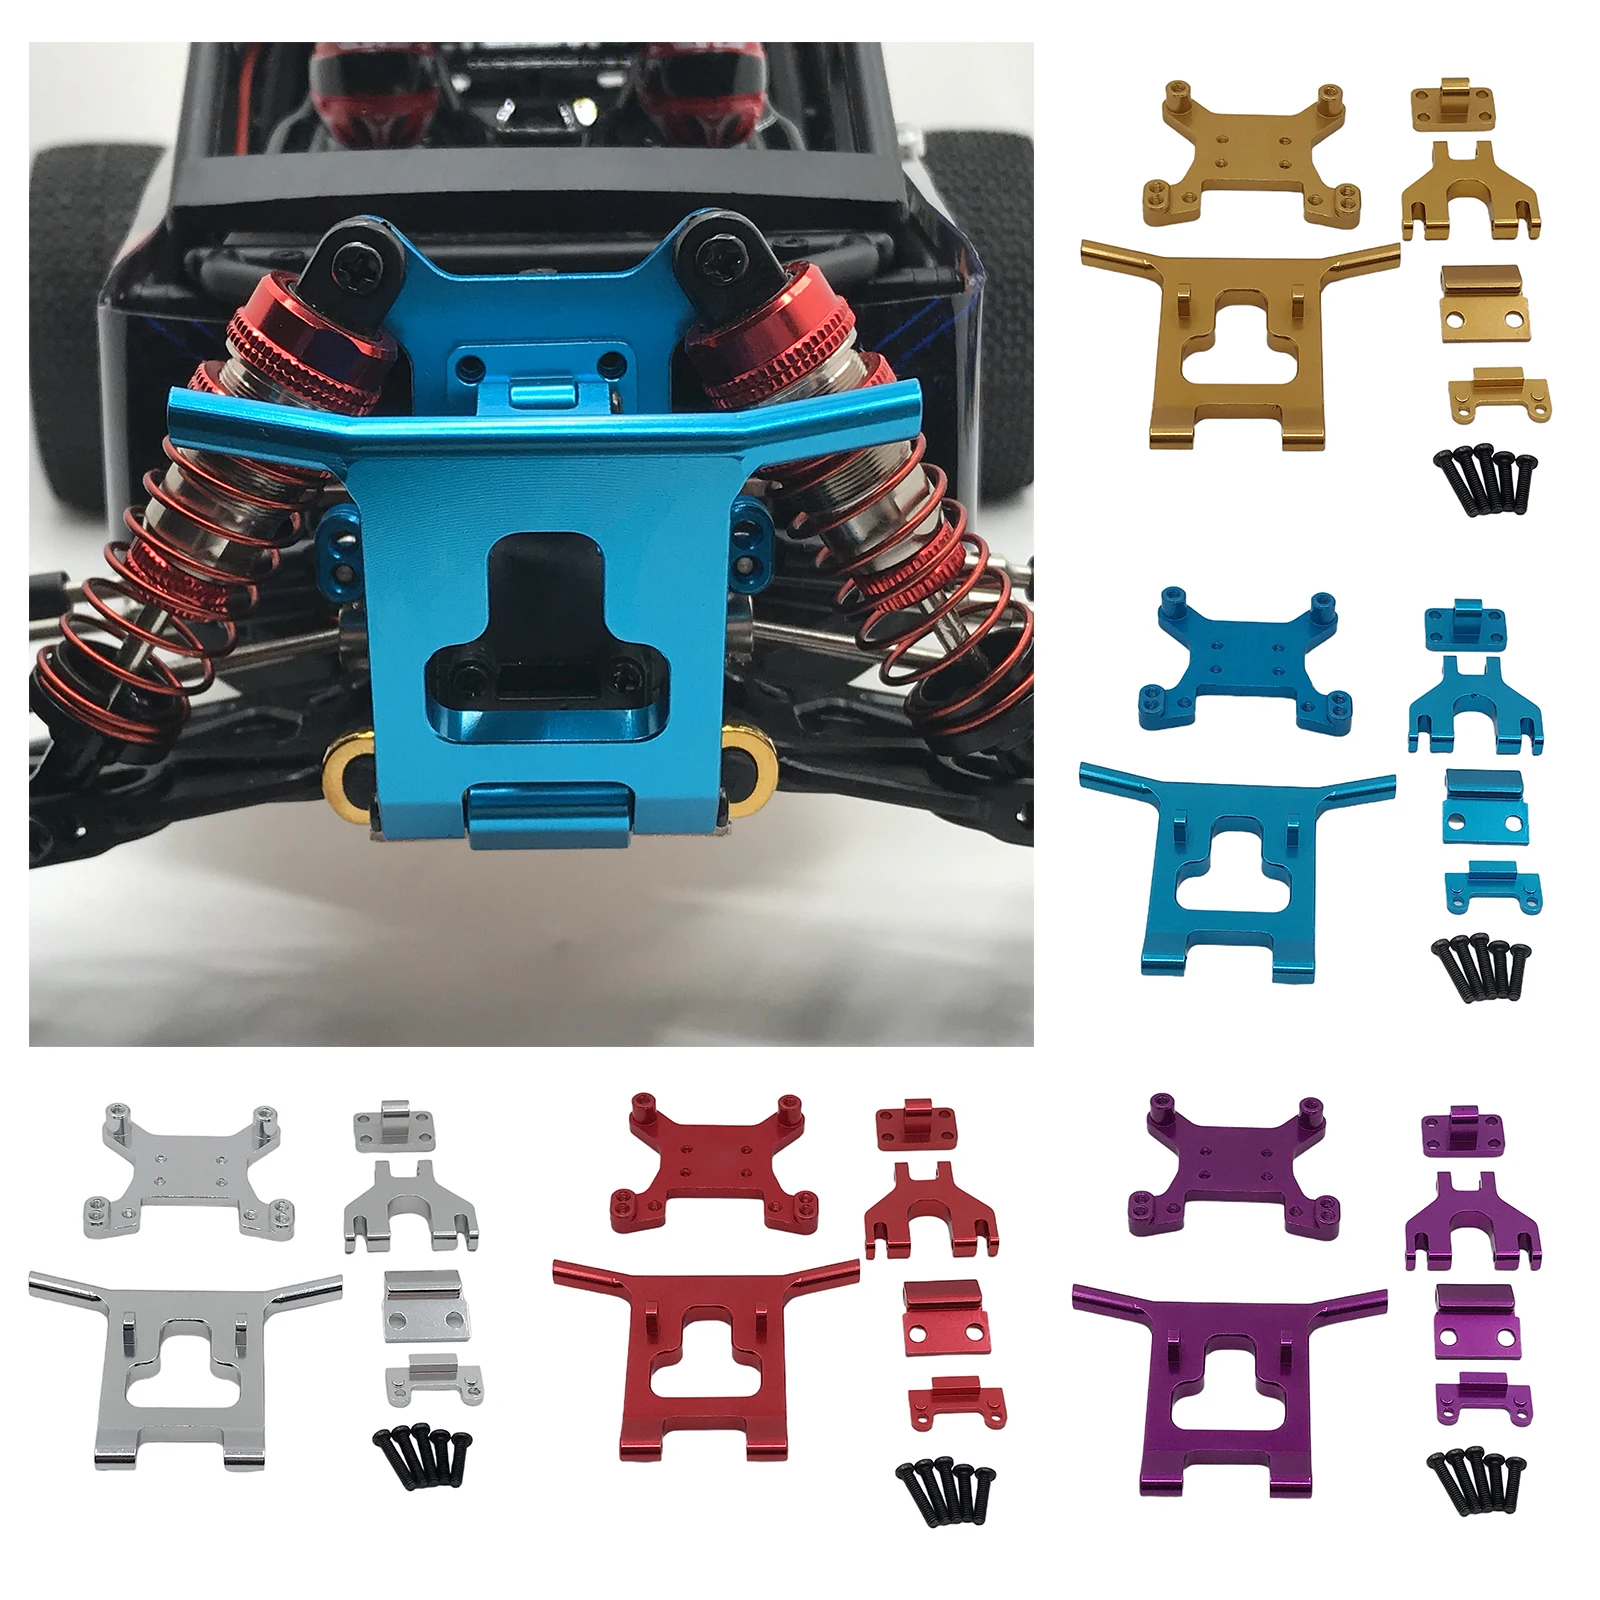 Metal Front Guard Bumper Shock Tower Kit for Wltoys 124018 1:12 Scale RC Car, Easy to Install